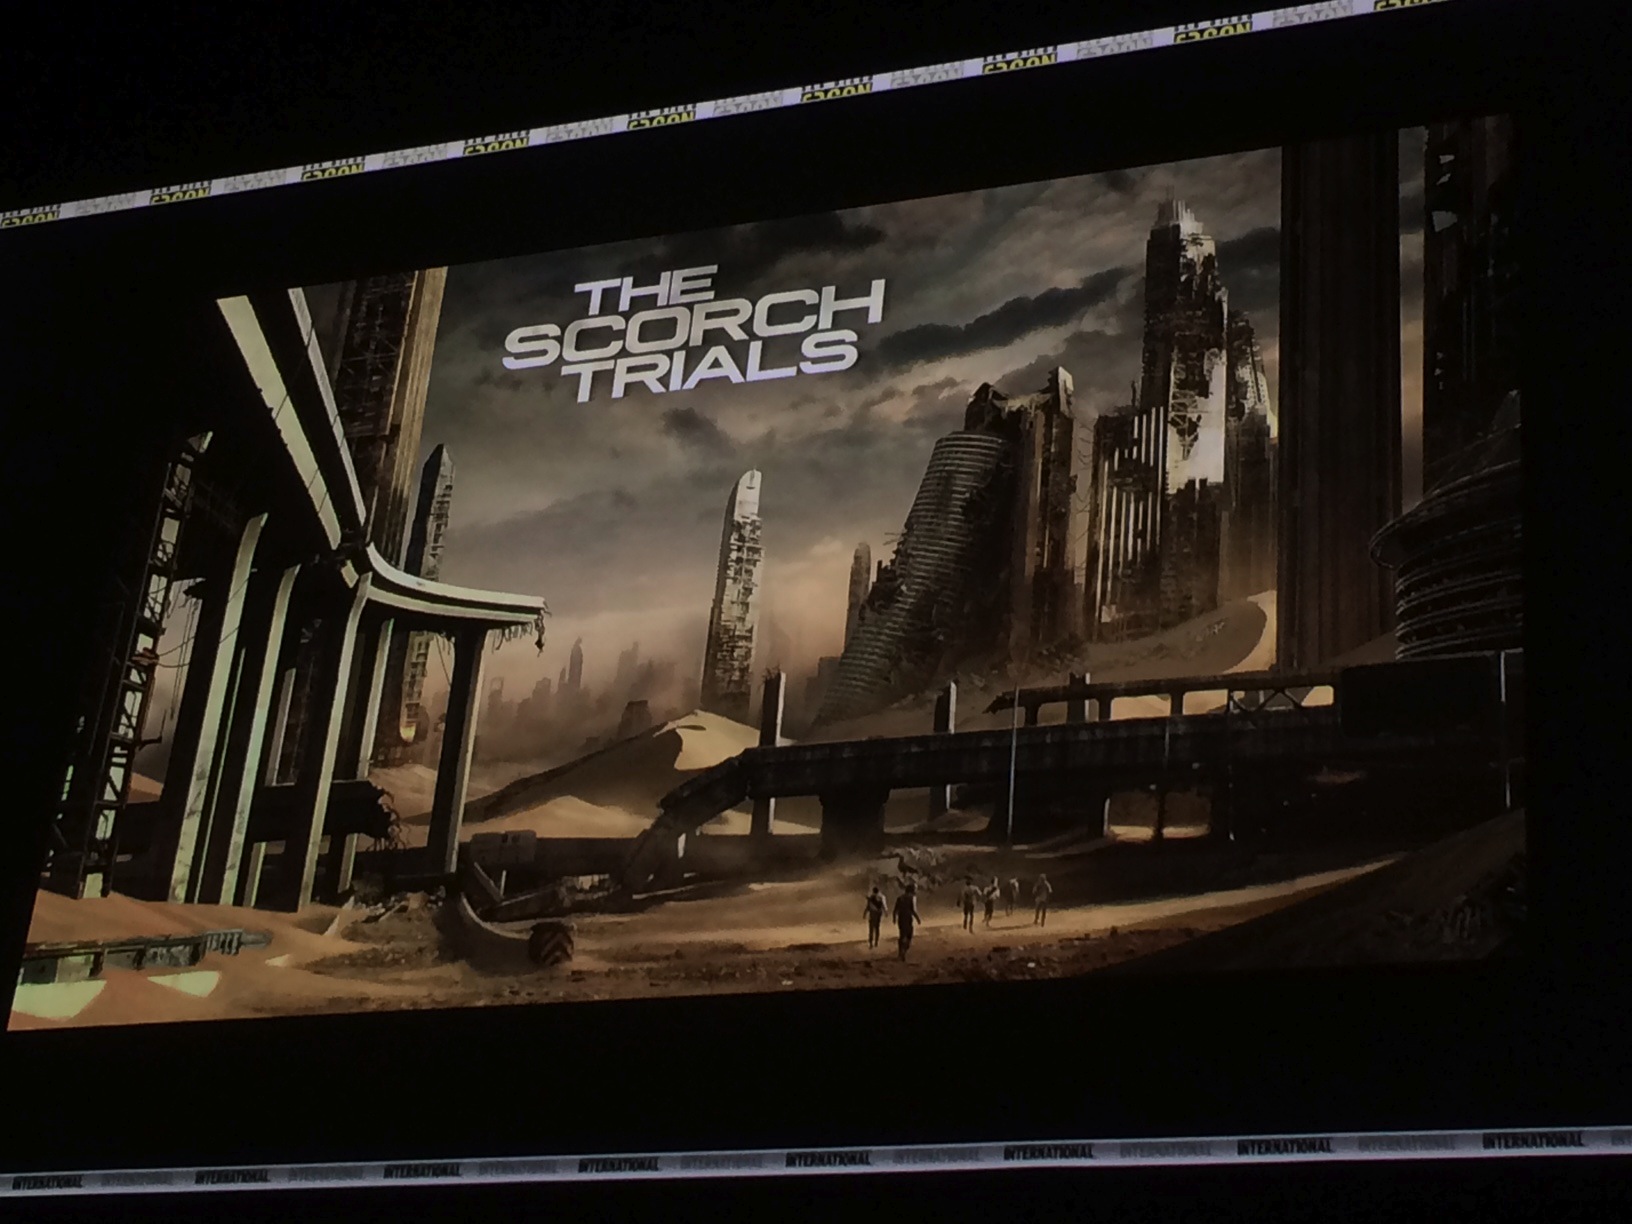 The Maze Runner Sequel The Scorch Trials Concept Art Revealed [Comic Con  2014]